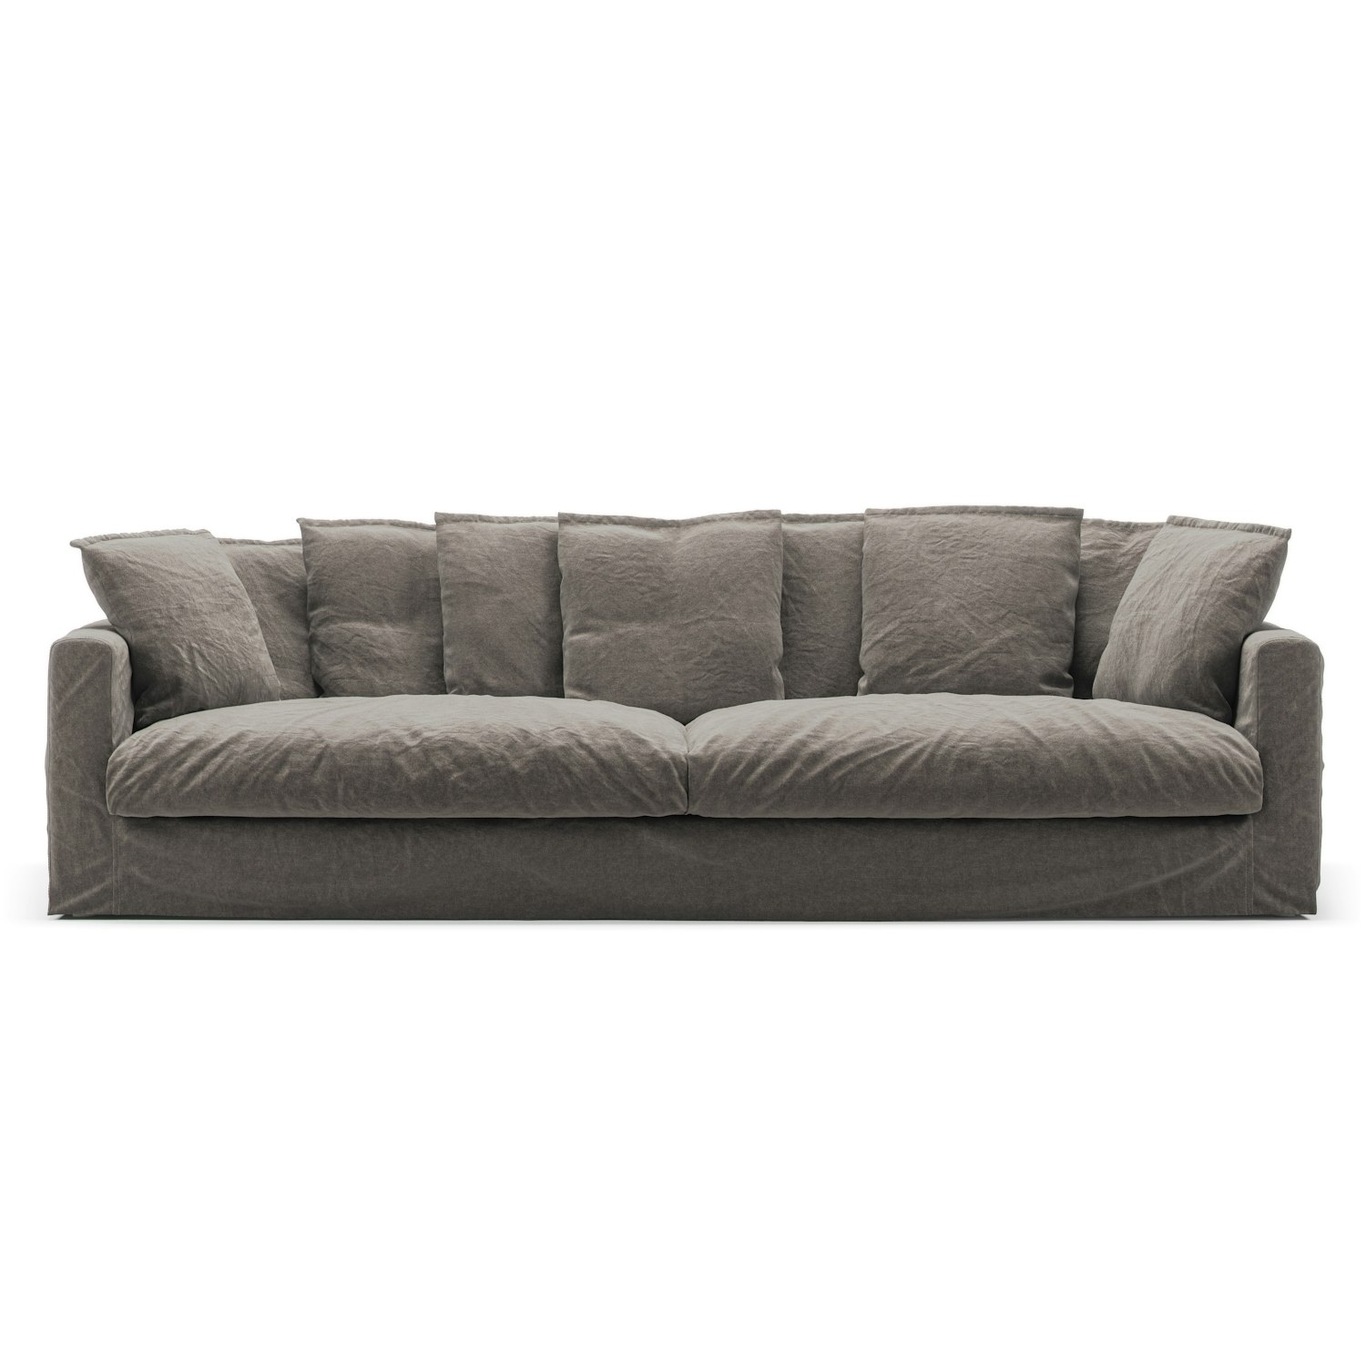 Le Grand Air Upholstery 4-Seater Linen, Smokey Granite